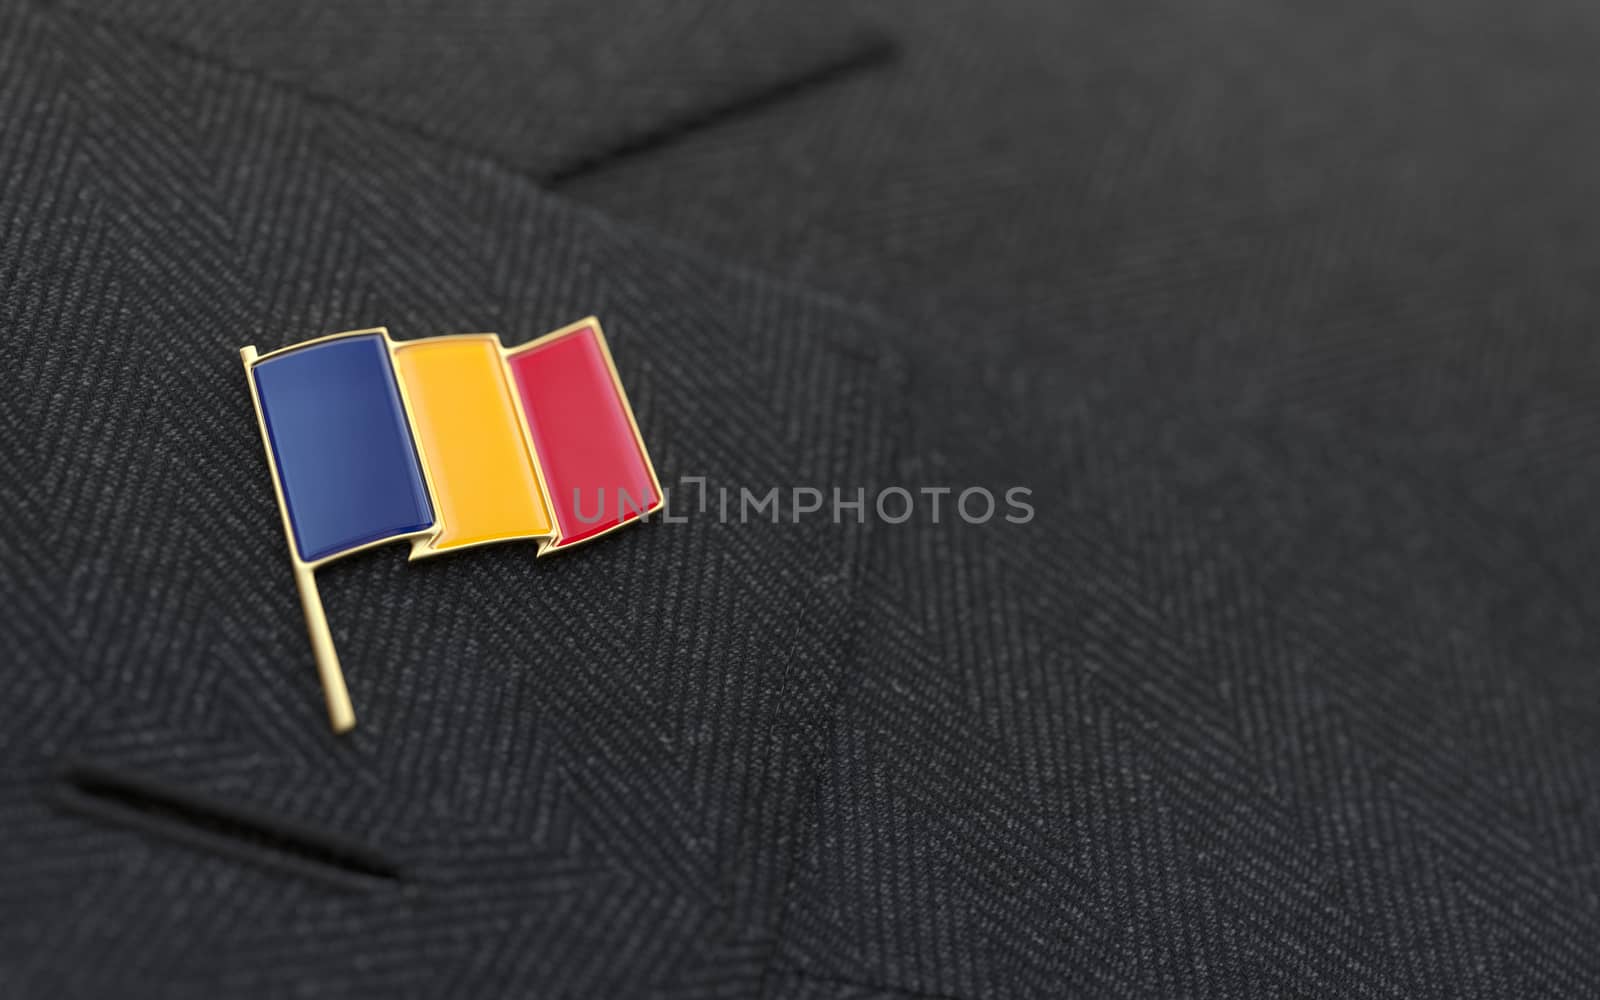 Romania flag lapel pin on the collar of a business suit jacket shows patriotism